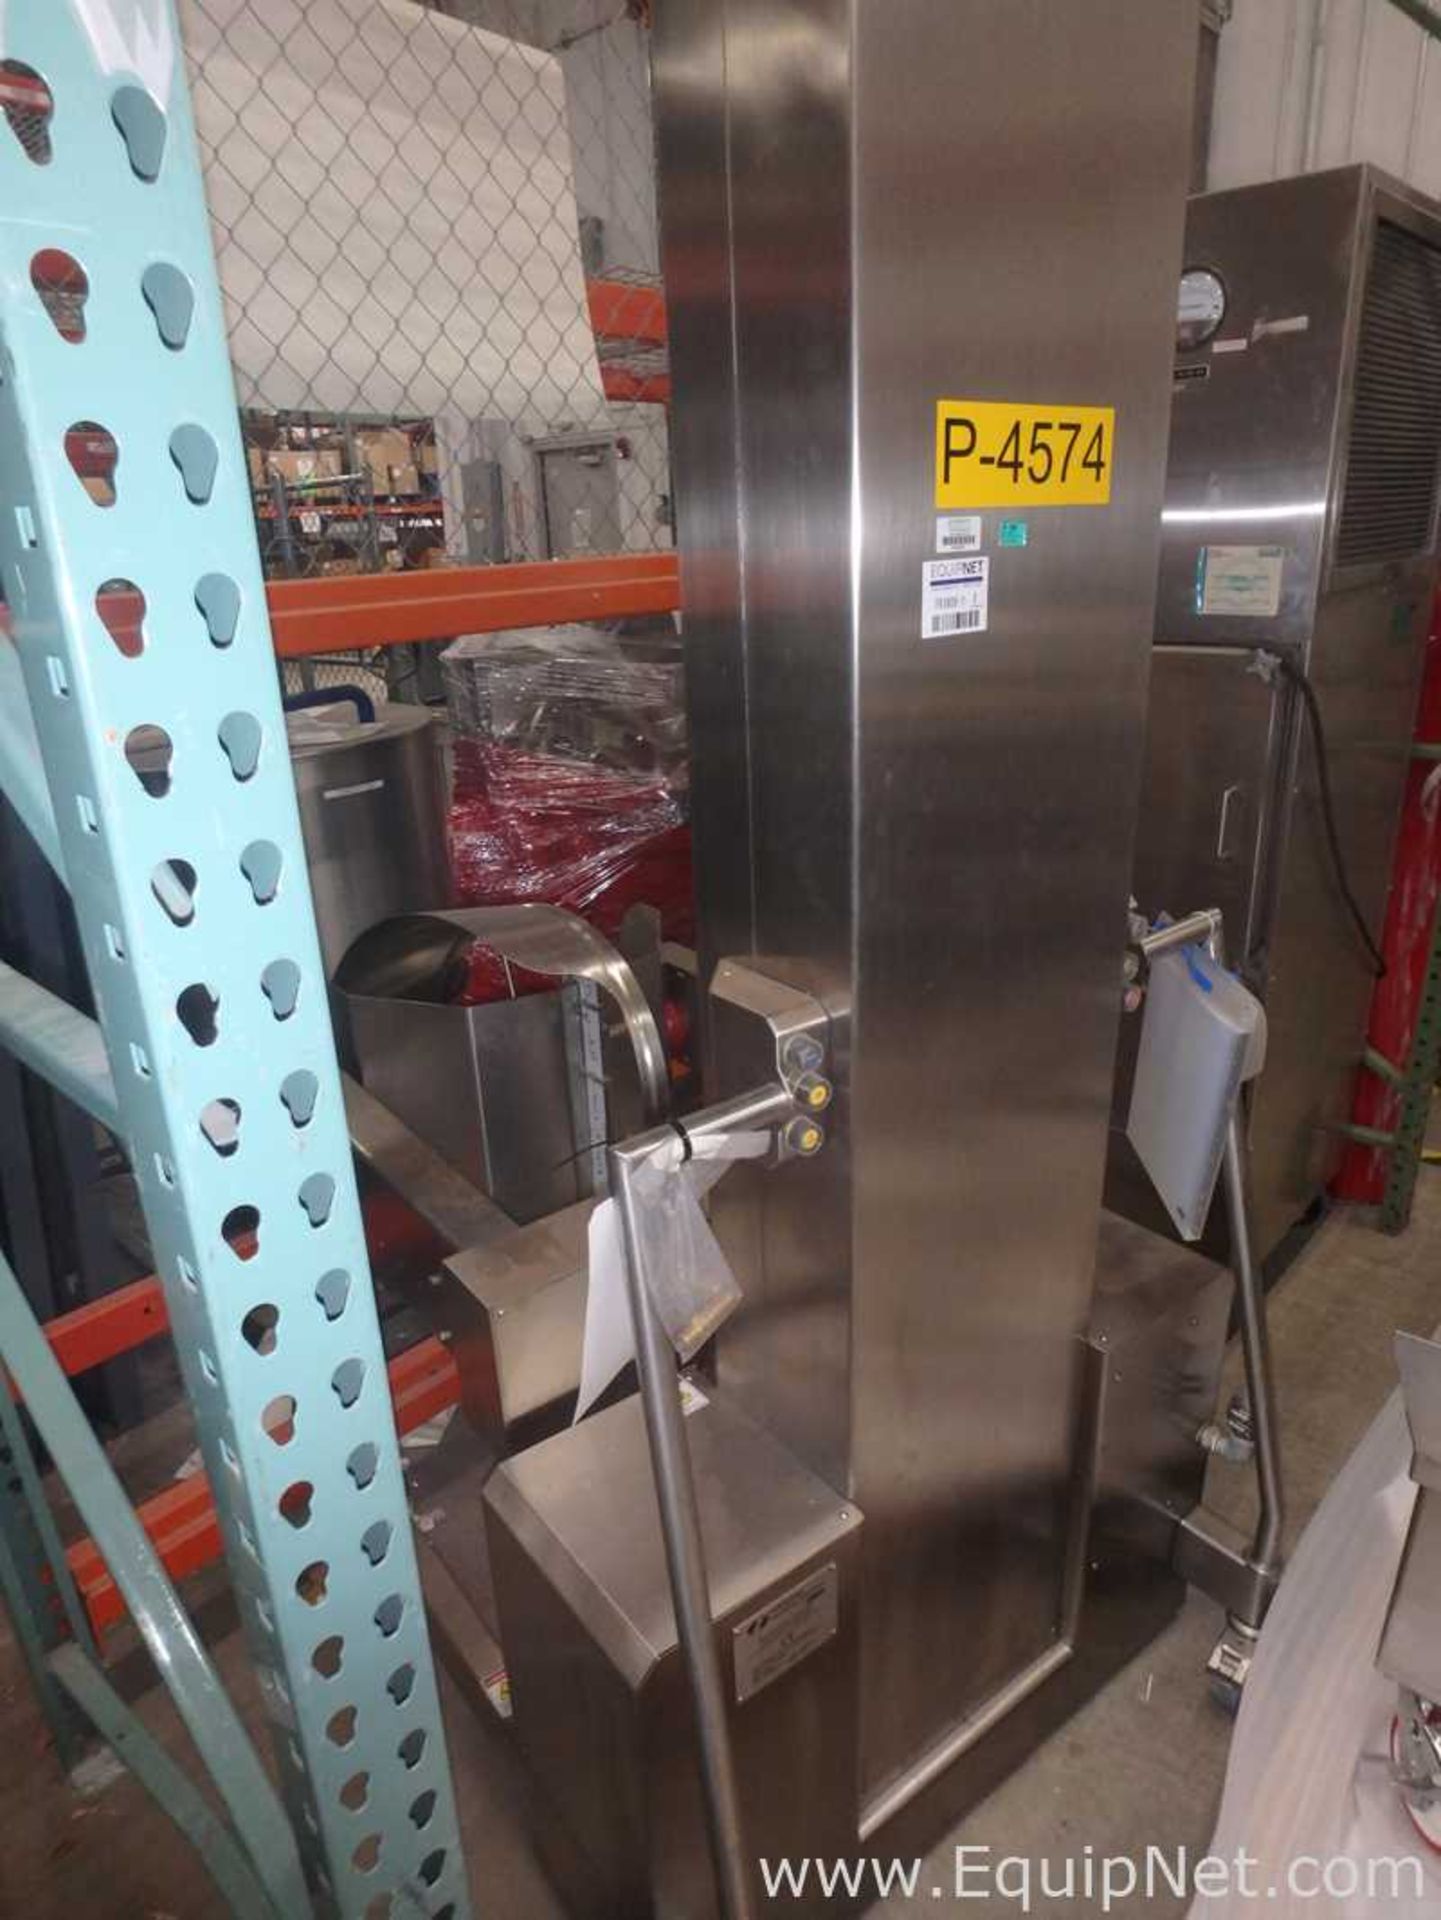 EQUIPNET LISTING #783808; REMOVAL COST: TBD; DESCRIPTION: Palpharma Lift - Image 3 of 4